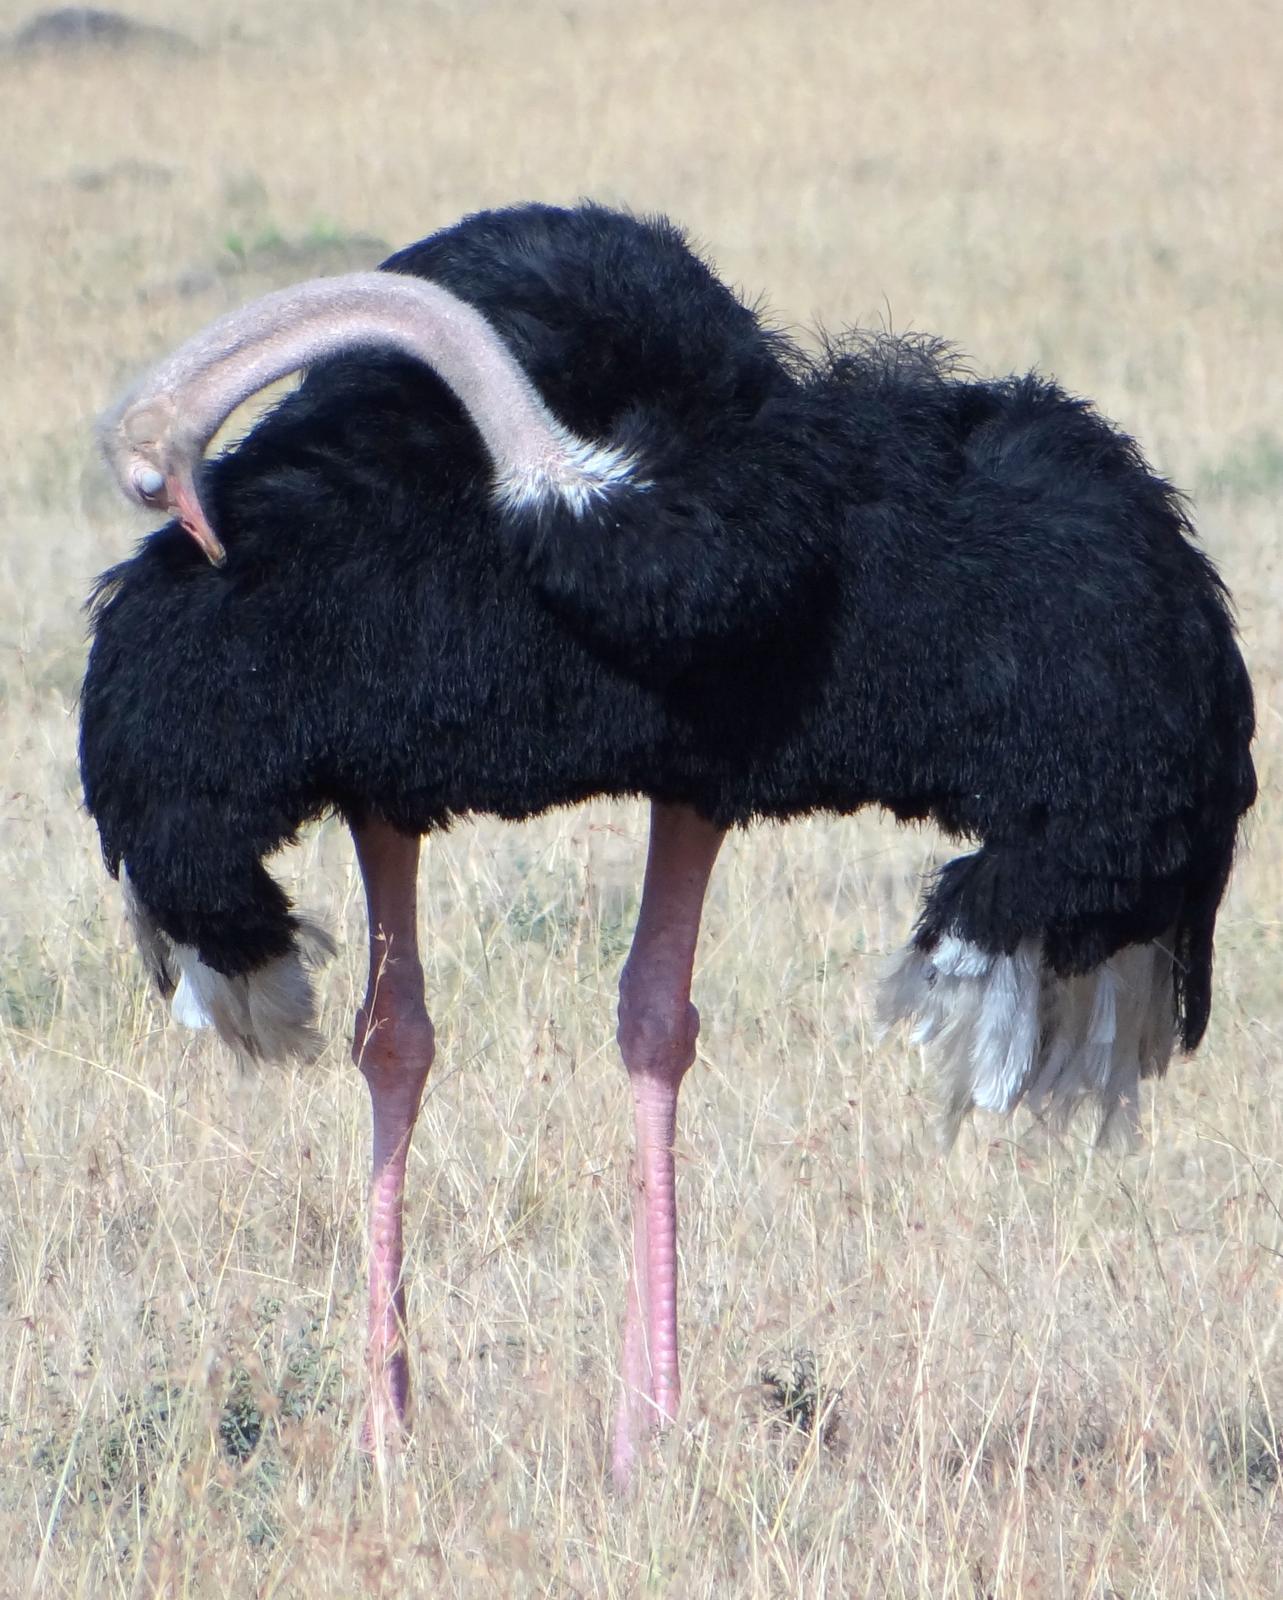 Common Ostrich Photo by Todd A. Watkins